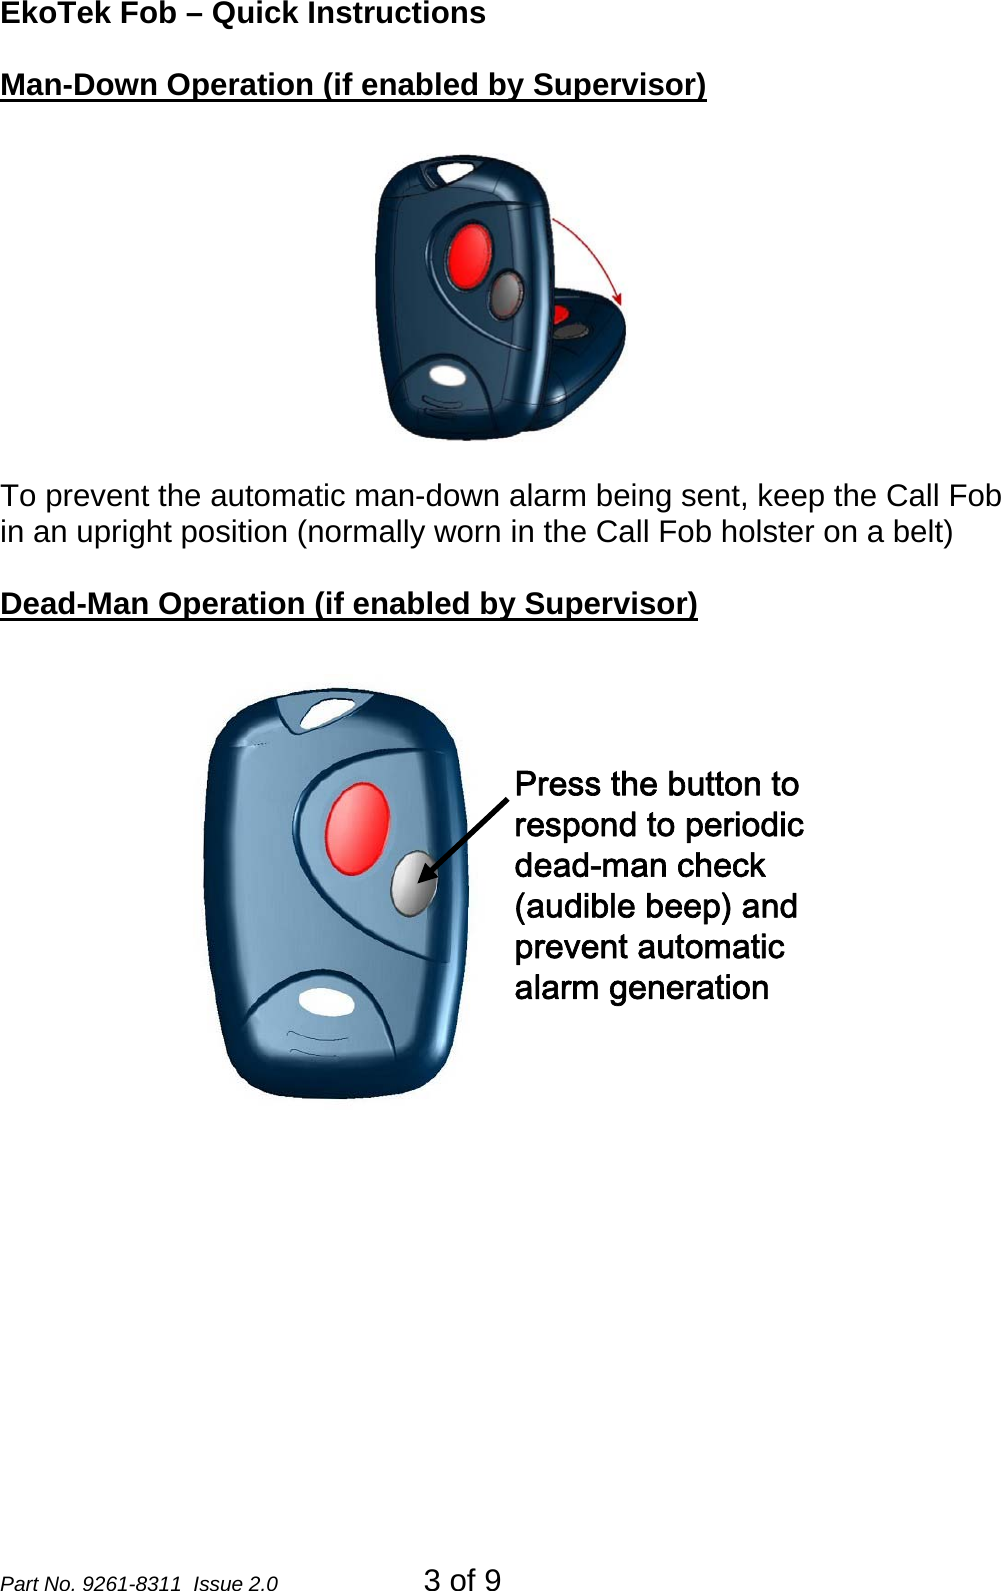 EkoTek Fob – Quick Instructions Man-Down Operation (if enabled by Supervisor) To prevent the automatic man-down alarm being sent, keep the Call Fob in an upright position (normally worn in the Call Fob holster on a belt)  Dead-Man Operation (if enabled by Supervisor) Press the button to respond to periodic dead-man check (audible beep) and prevent automatic alarm generation Part No. 9261-8311  Issue 2.0  3 of 9 